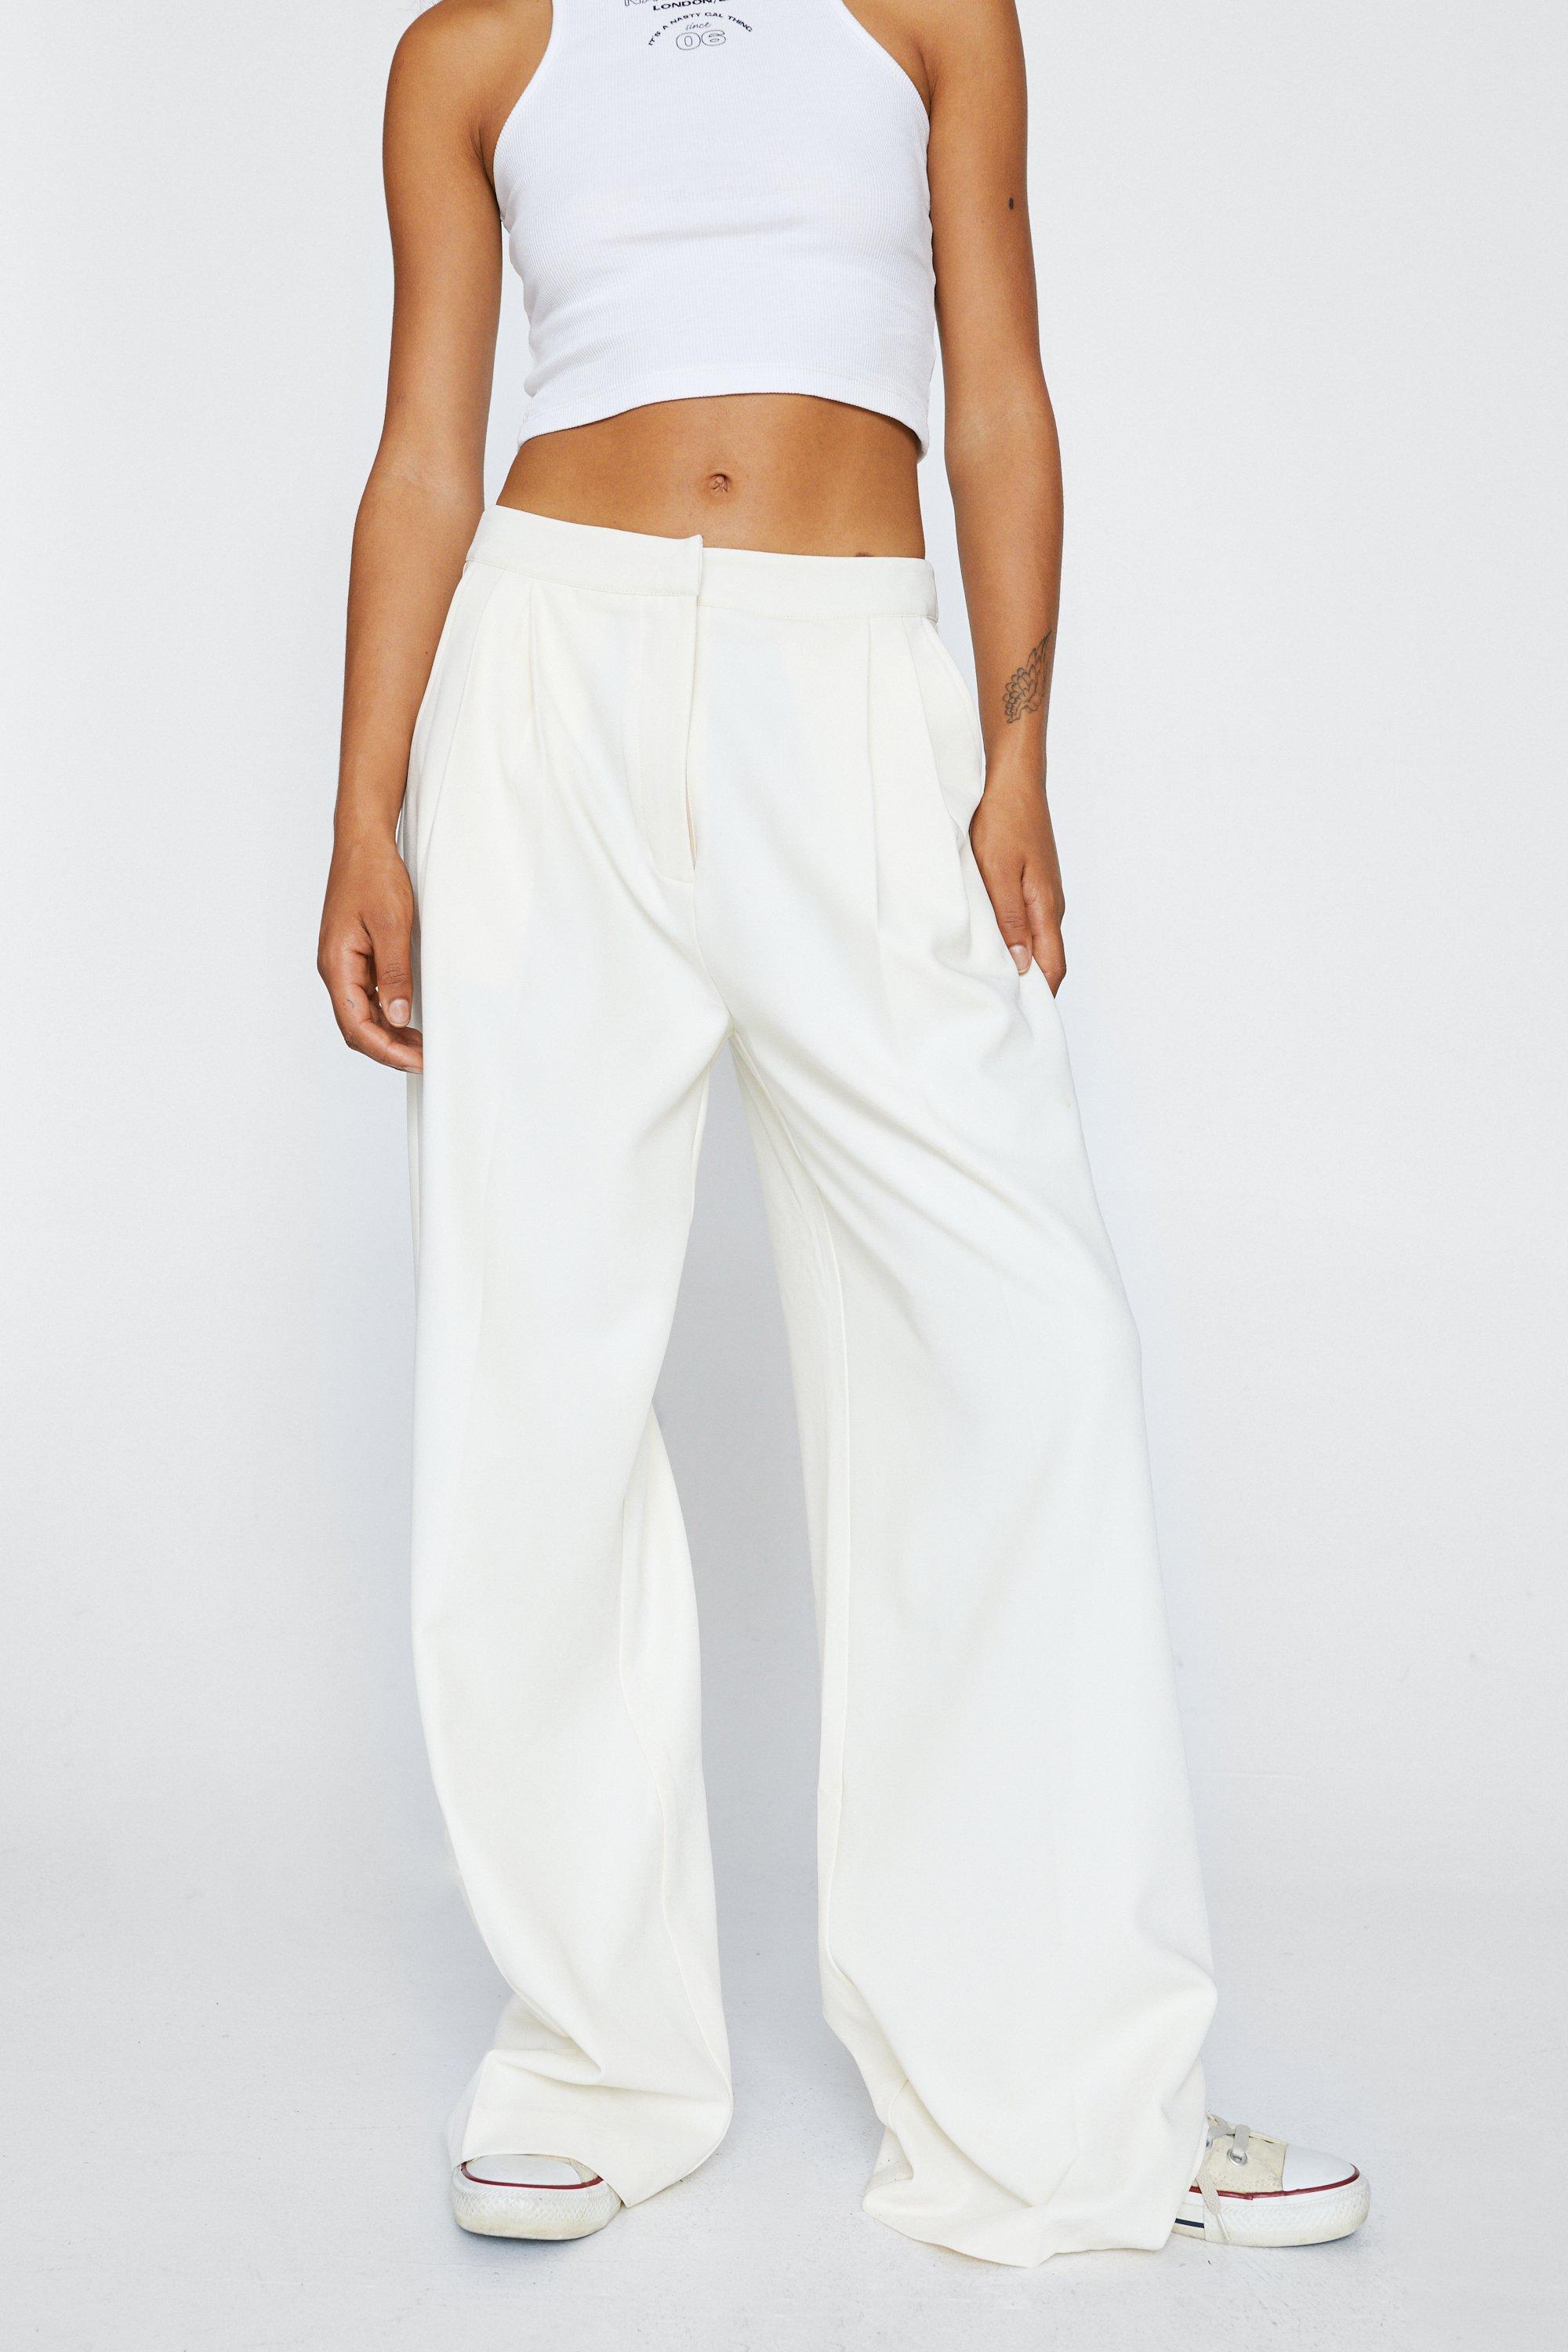 These 8 White Trouser Outfits Are Perfect For Spring | Who What Wear UK